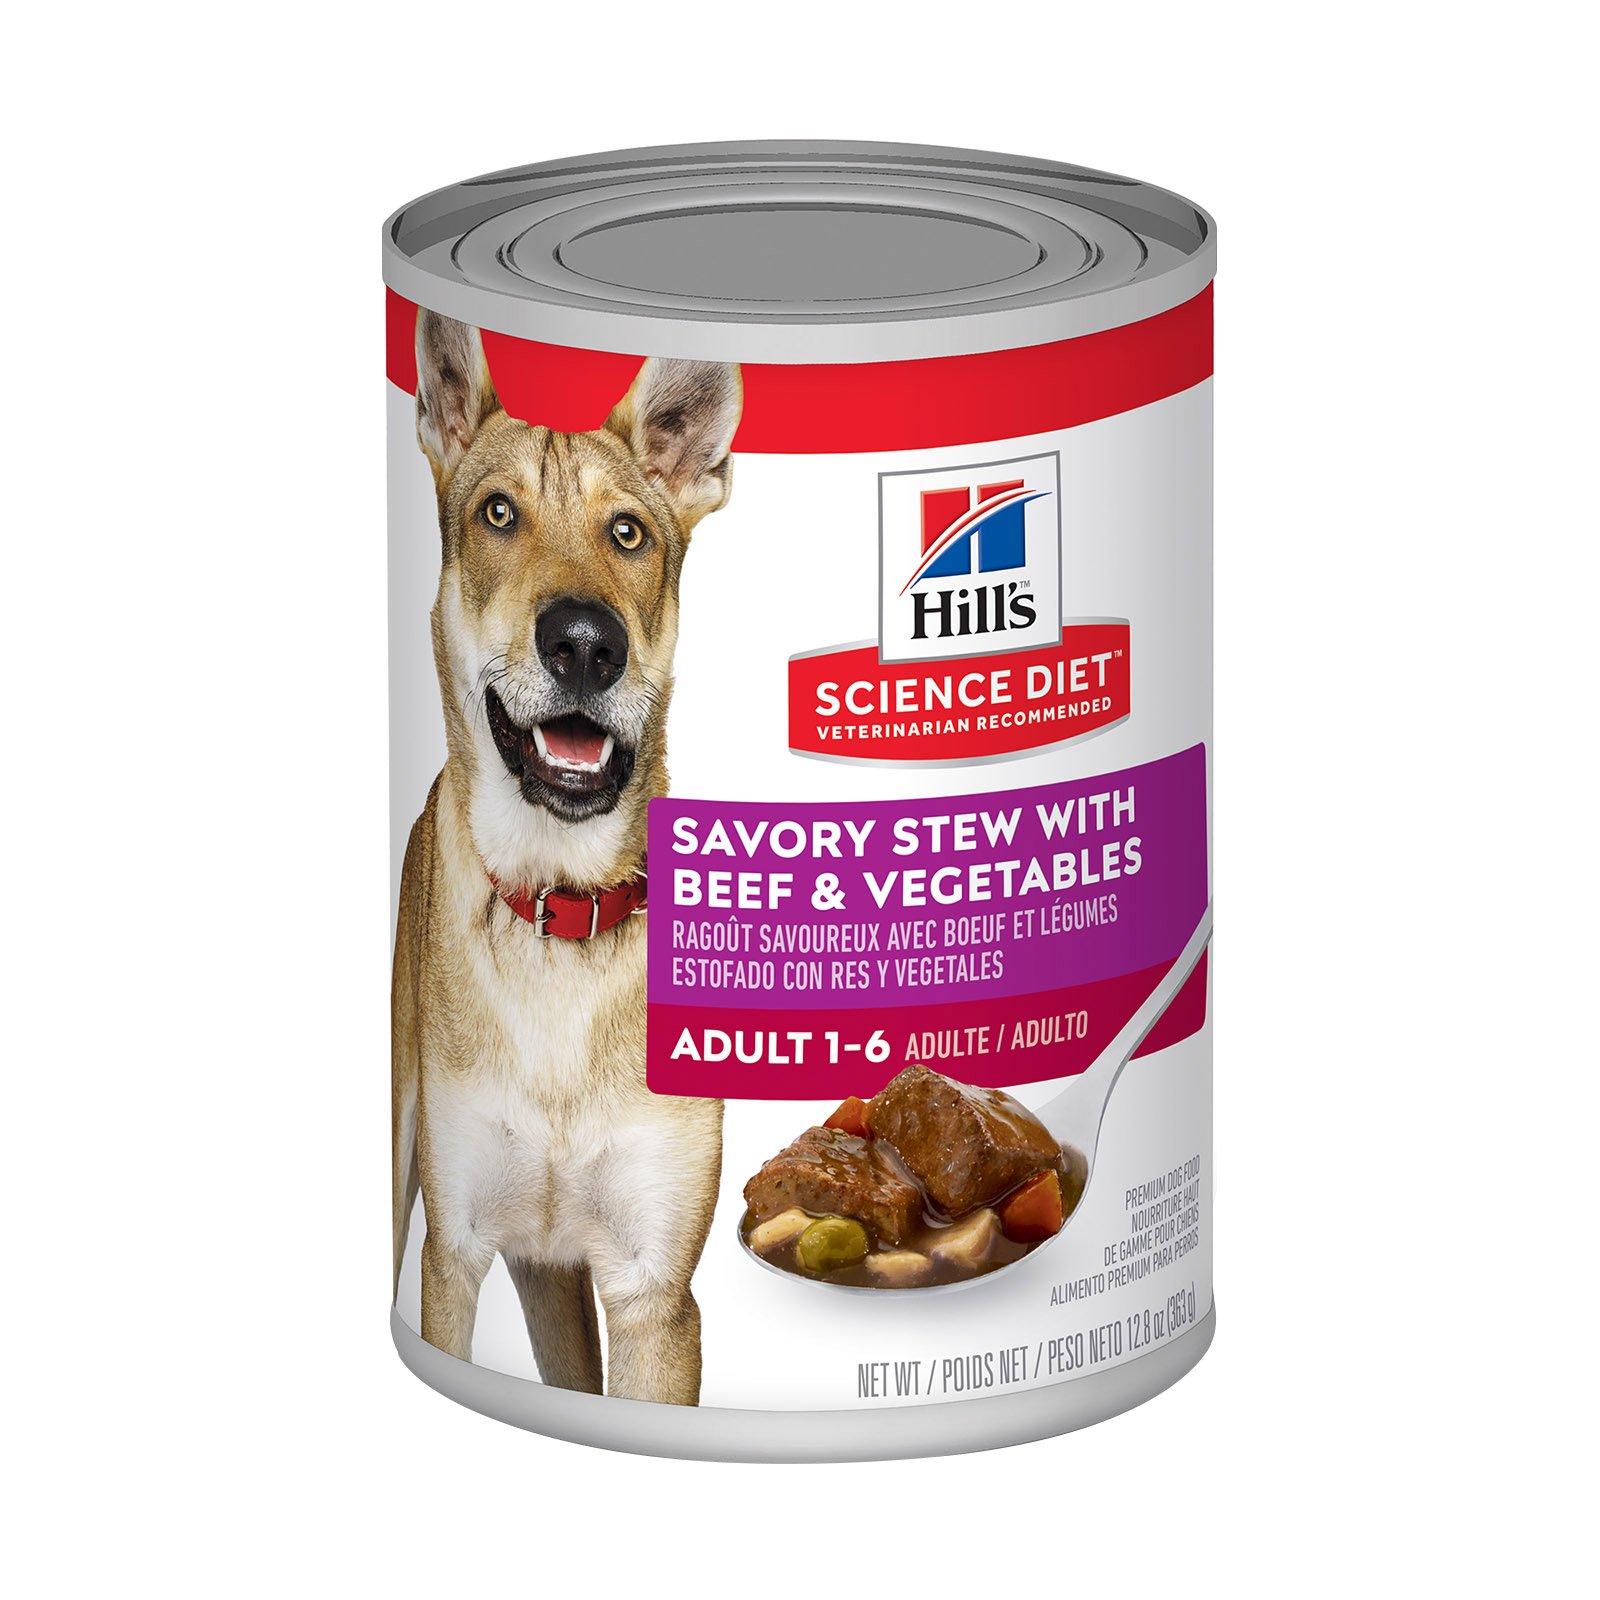 Hill's Science Diet Adult Savory Stew Beef & Vegetable Canned Dog Food